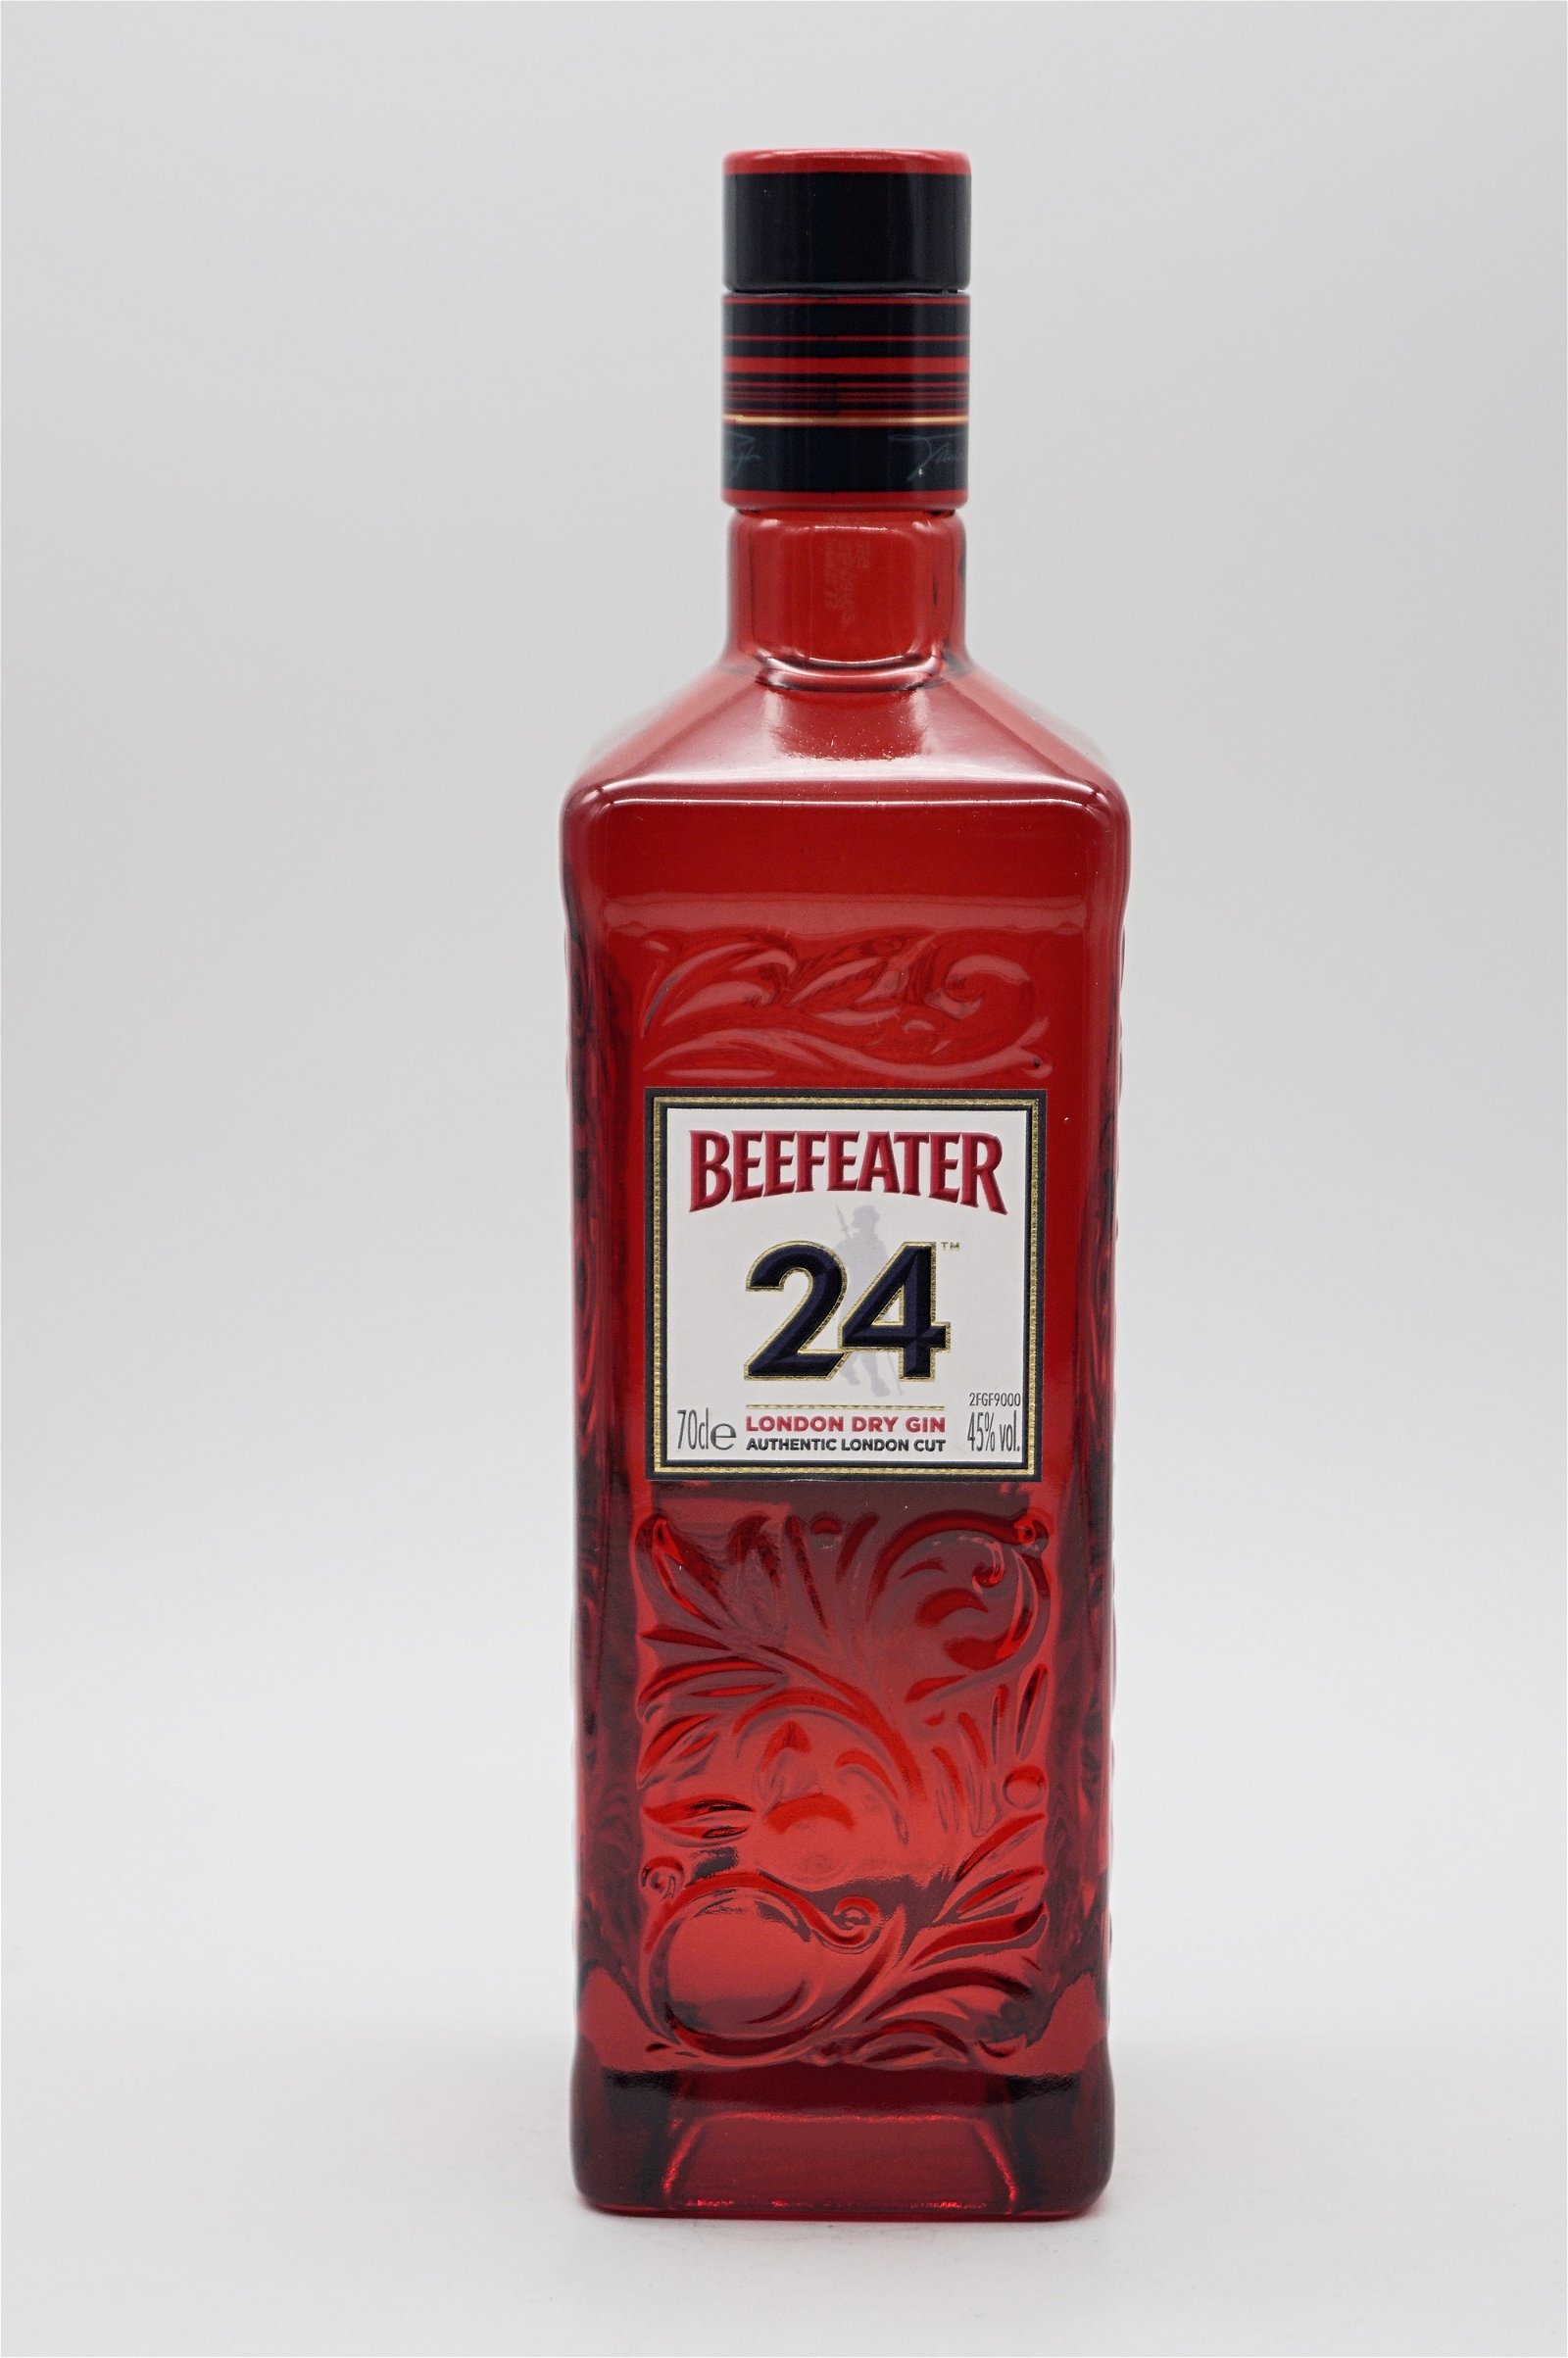 Beefeater London Dry Gin 24 